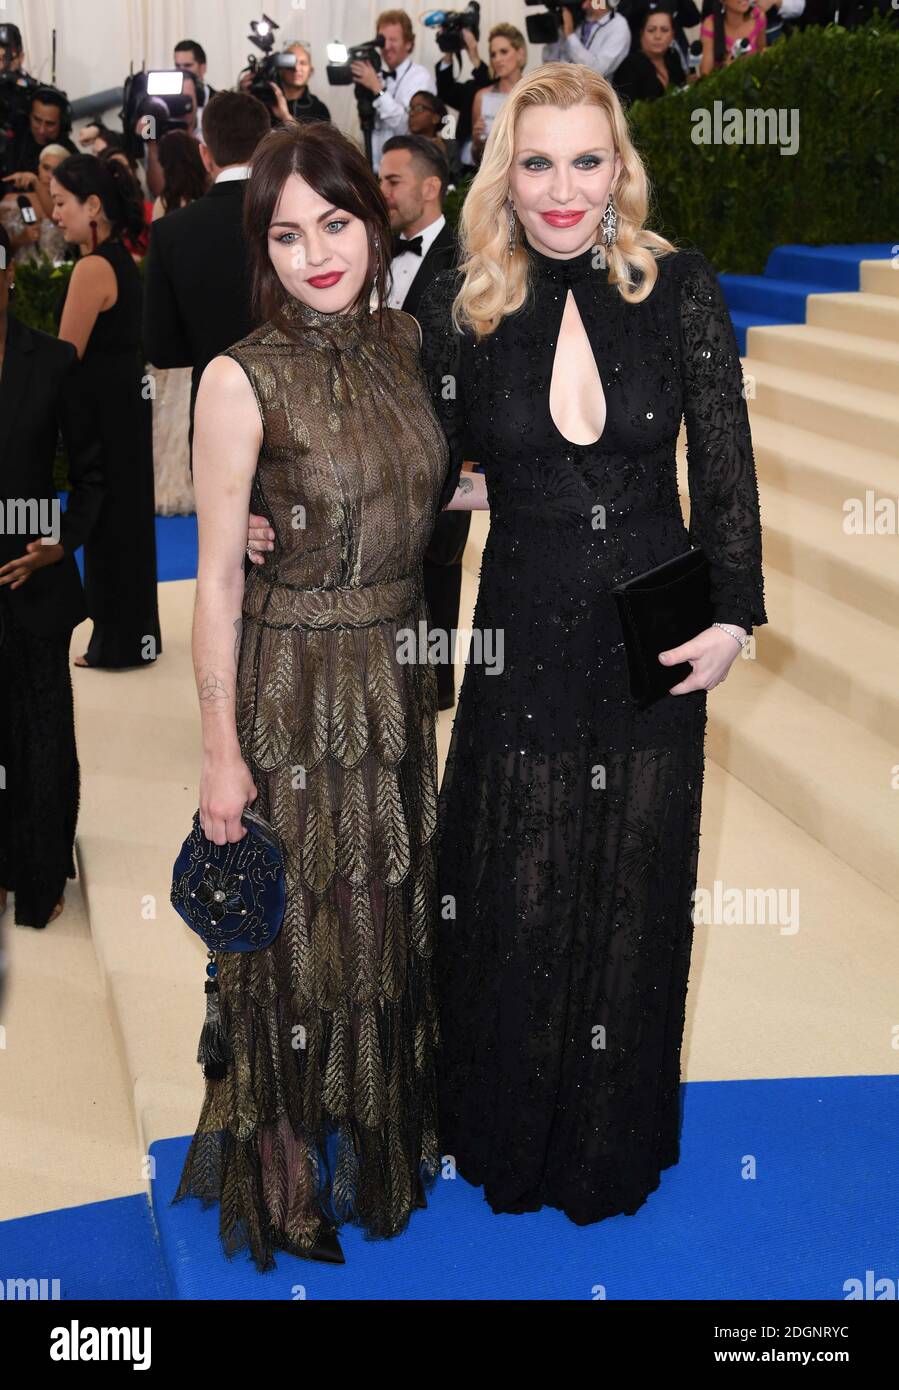 Frances Bean Cobai and Courtney Love attending The Metropolitan Museum of Art Costume Institute Benefit Gala 2017, in New York City, USA. Photo Credit should read: Doug Peters/EMPICS Entertainment. Stock Photo